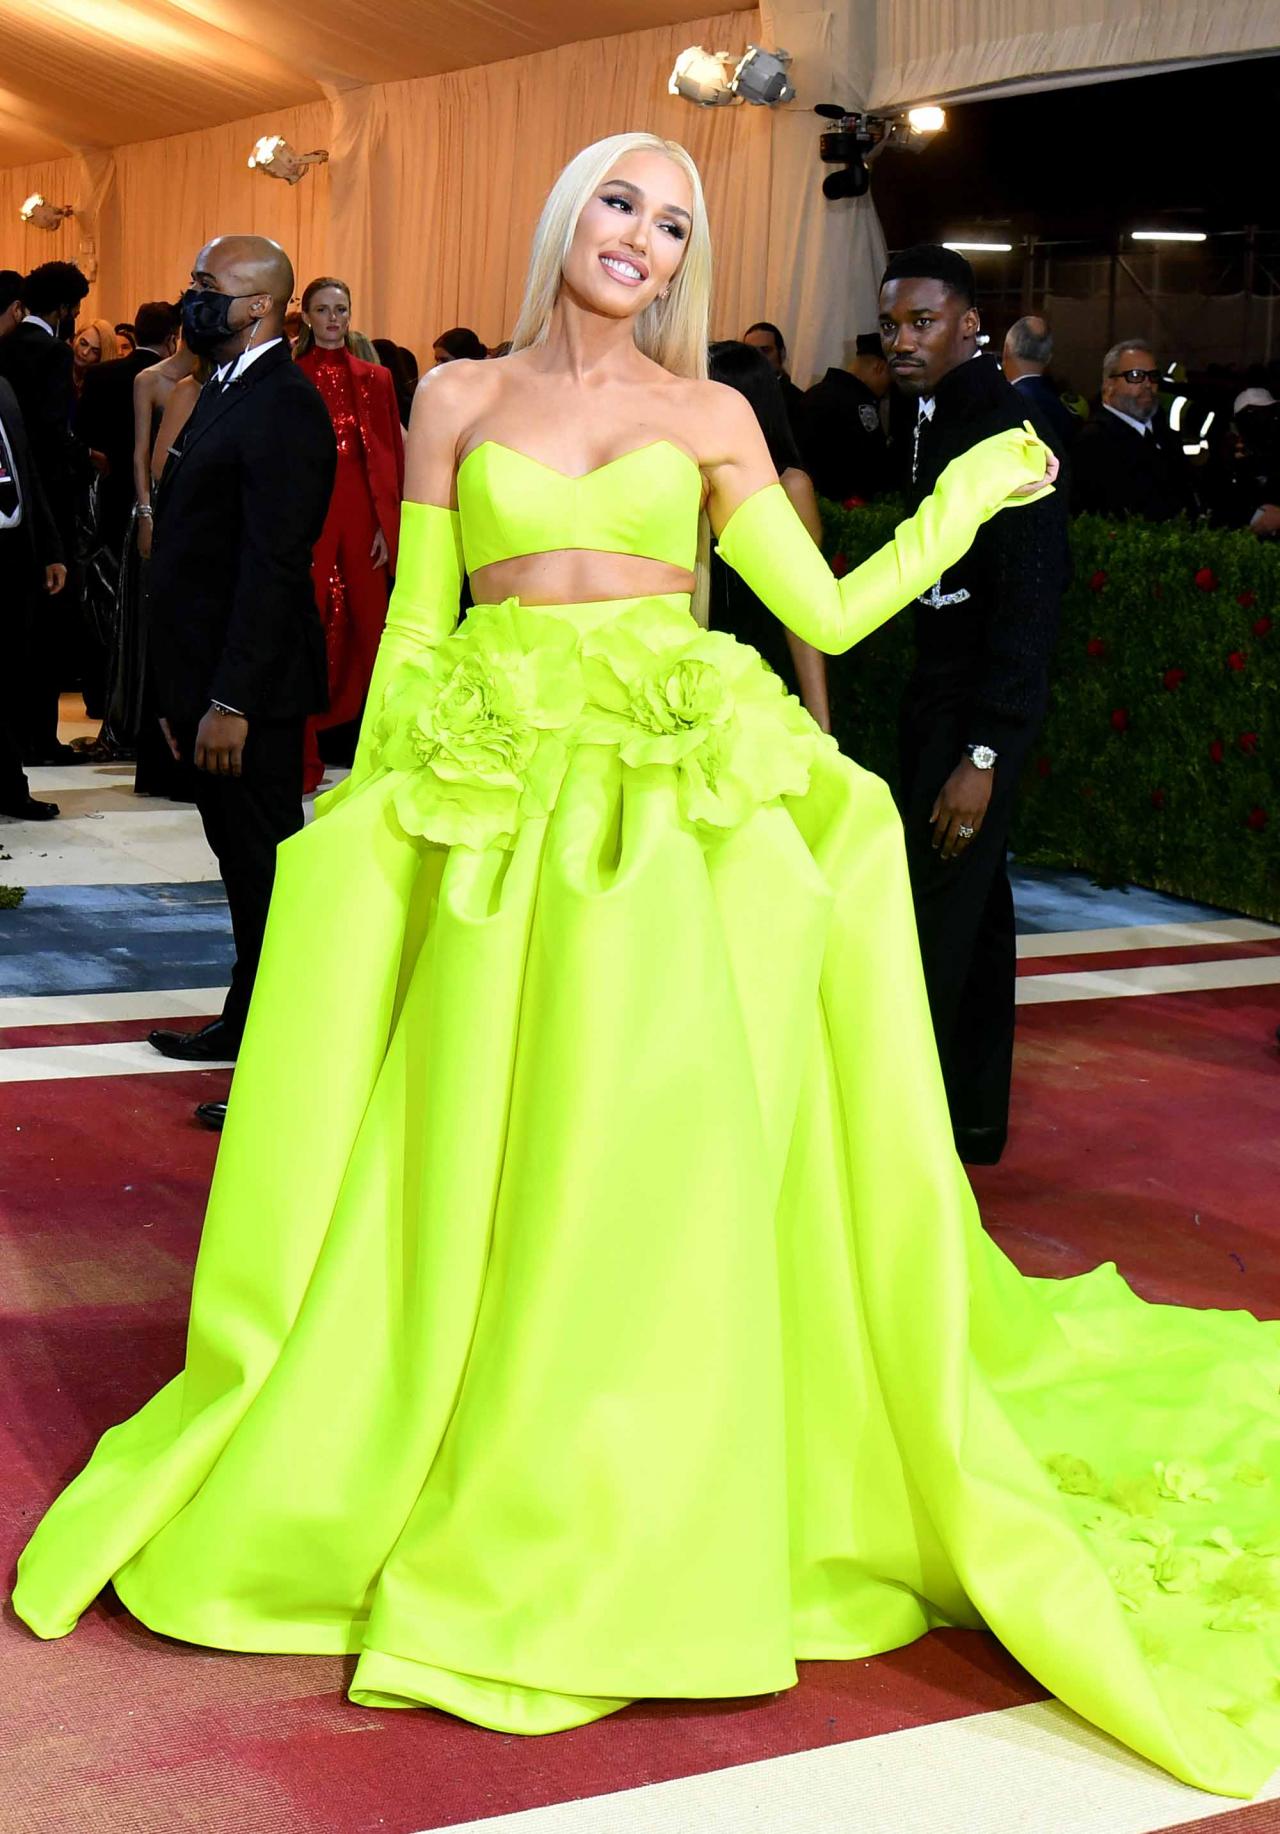 US singer-songwriter Gwen Stefani arrives for the 2022 Met Gala at the Metropolitan Museum of Art on May 2, 2022, in New York. - The Gala raises money for the Metropolitan Museum of Art's Costume Institute. The Gala's 2022 theme is "In America: An Anthology of Fashion". (Photo by ANGELA  WEISS / AFP)